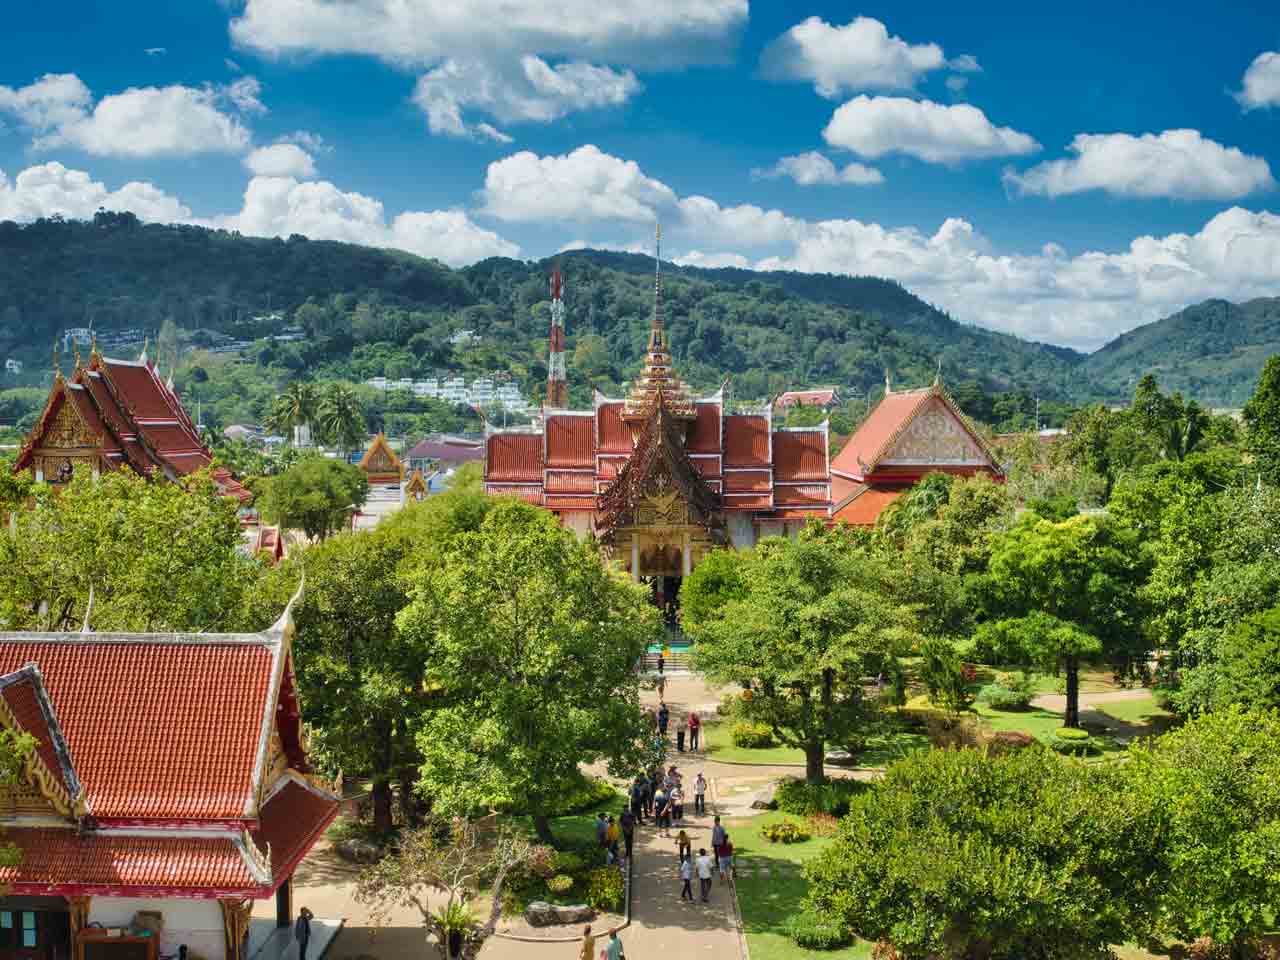 Things to do in Phuket, Thailand: Enjoy a view of temples, jungle and mountain.